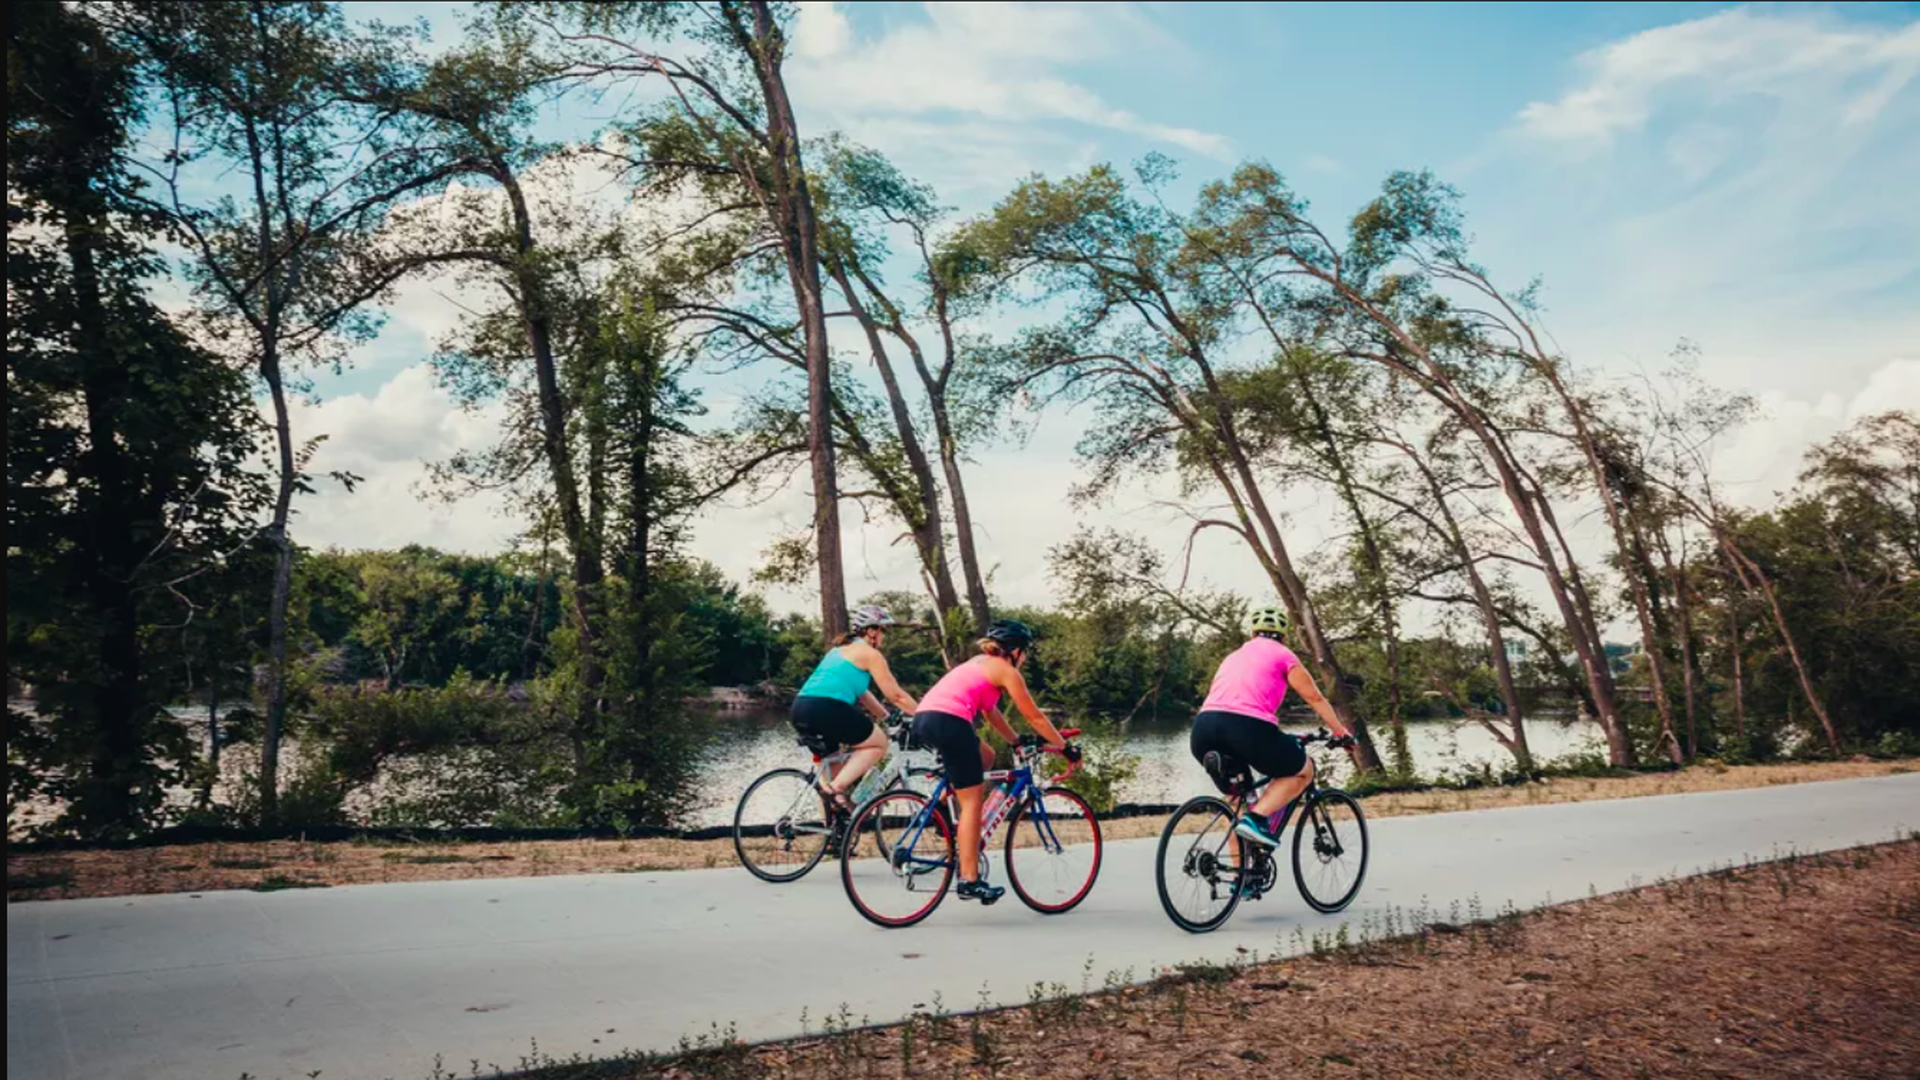 In this image, three bicyclists in brightly colored shirts and black shorts bike down a wooded street.